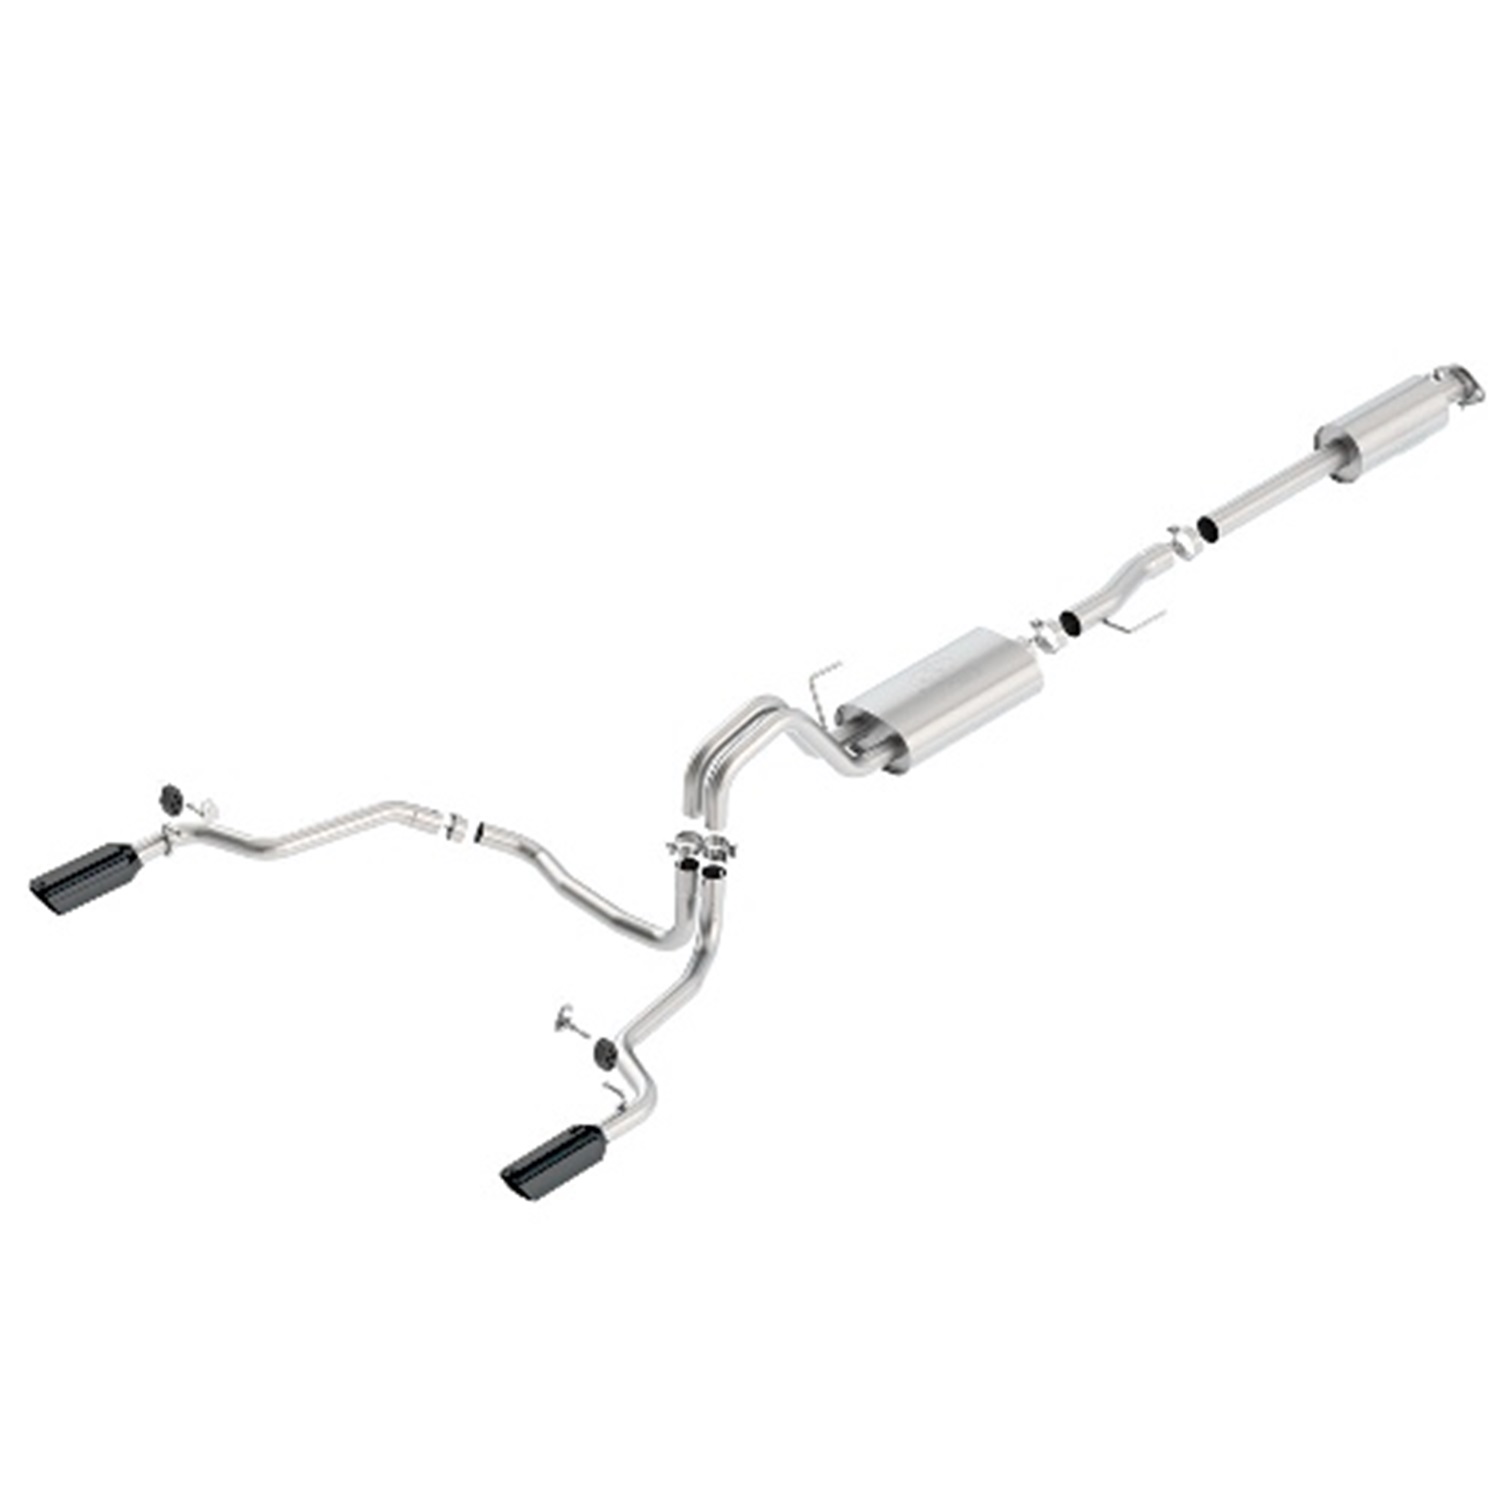 Ford Racing Ford Racing M-5200-F1535DTB Cat-Back Exhaust System Fits 15 F-150